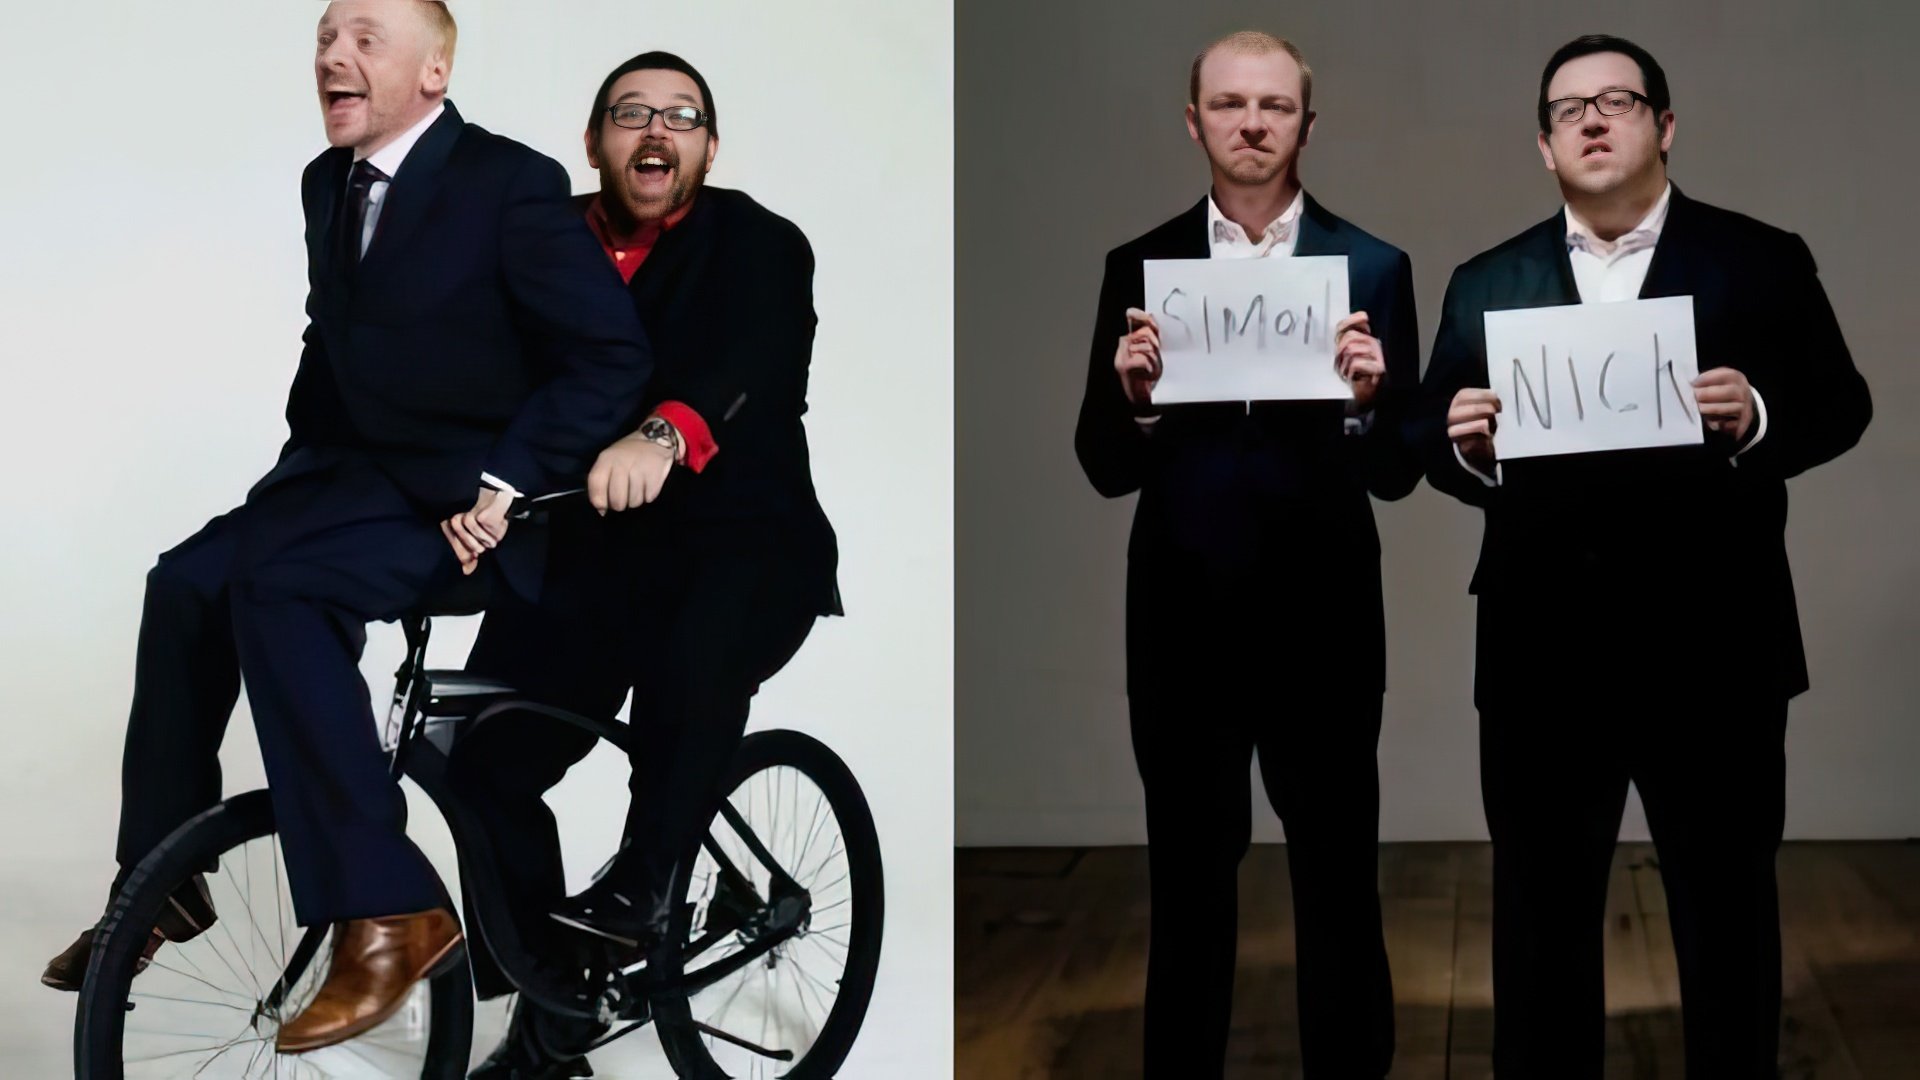 Simon Pegg and Nick Frost working together on films